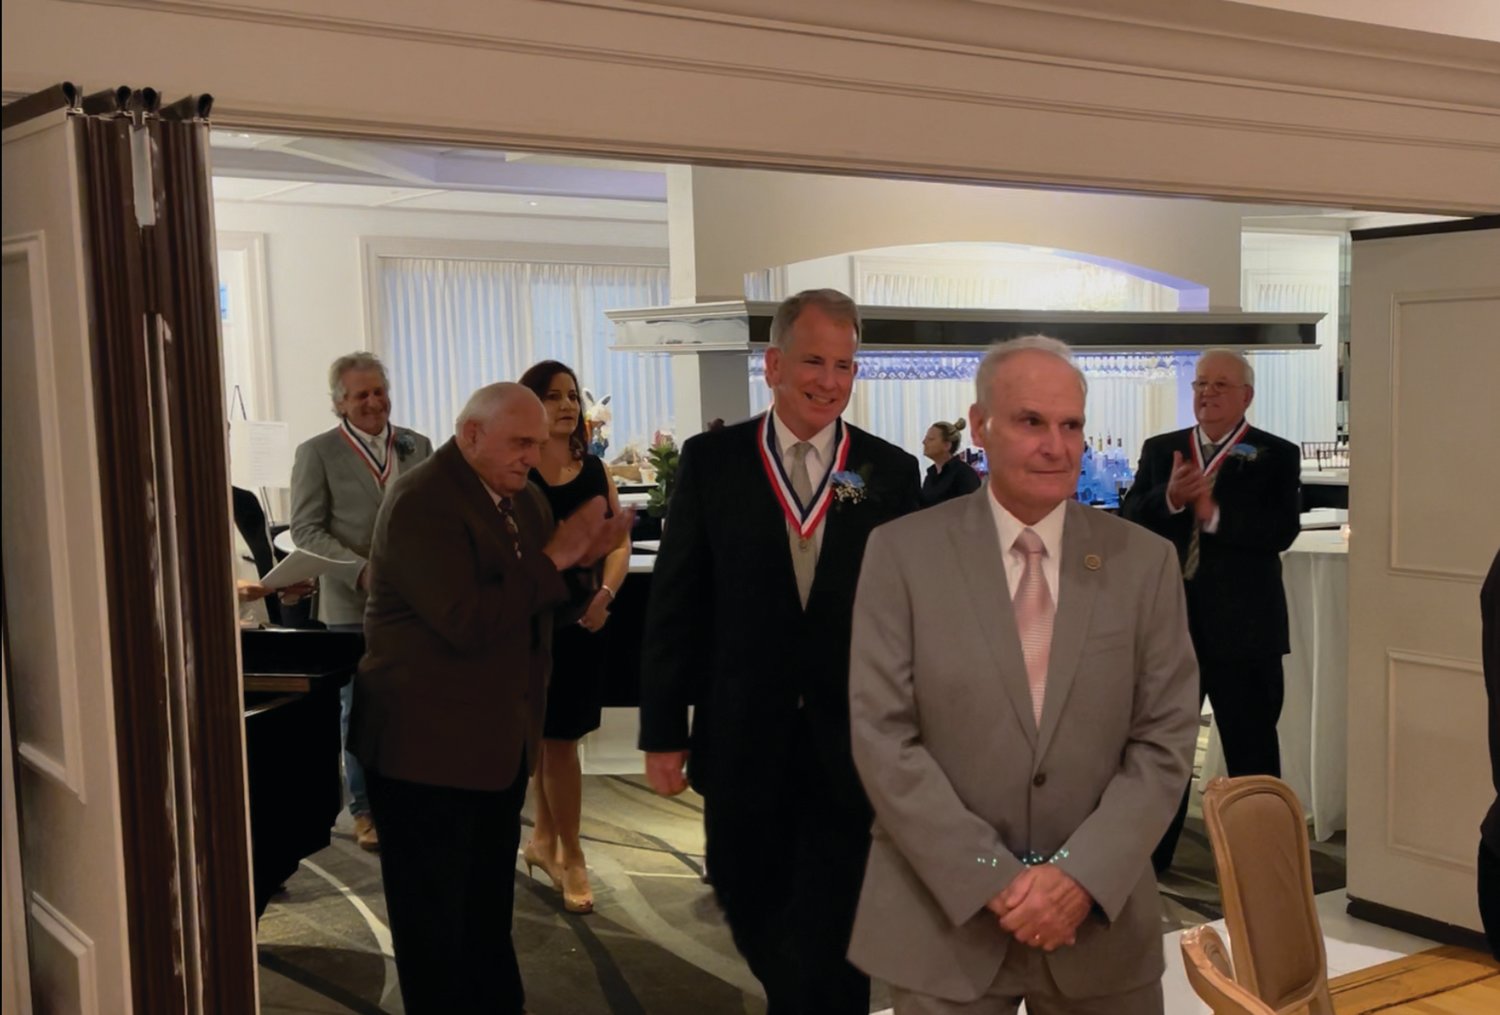 MAKING AN ENTRANCE: Fred Vincent, past president of the Cranston Hall of Fame Foundation’s board, escorts inductee Jeffrey Lanphear into last week’s dinner. Looking on, from left, are Anthony Tomaselli, Ken Mancuso, Superintendent Jeannine Nota-Masse and William Stamp.